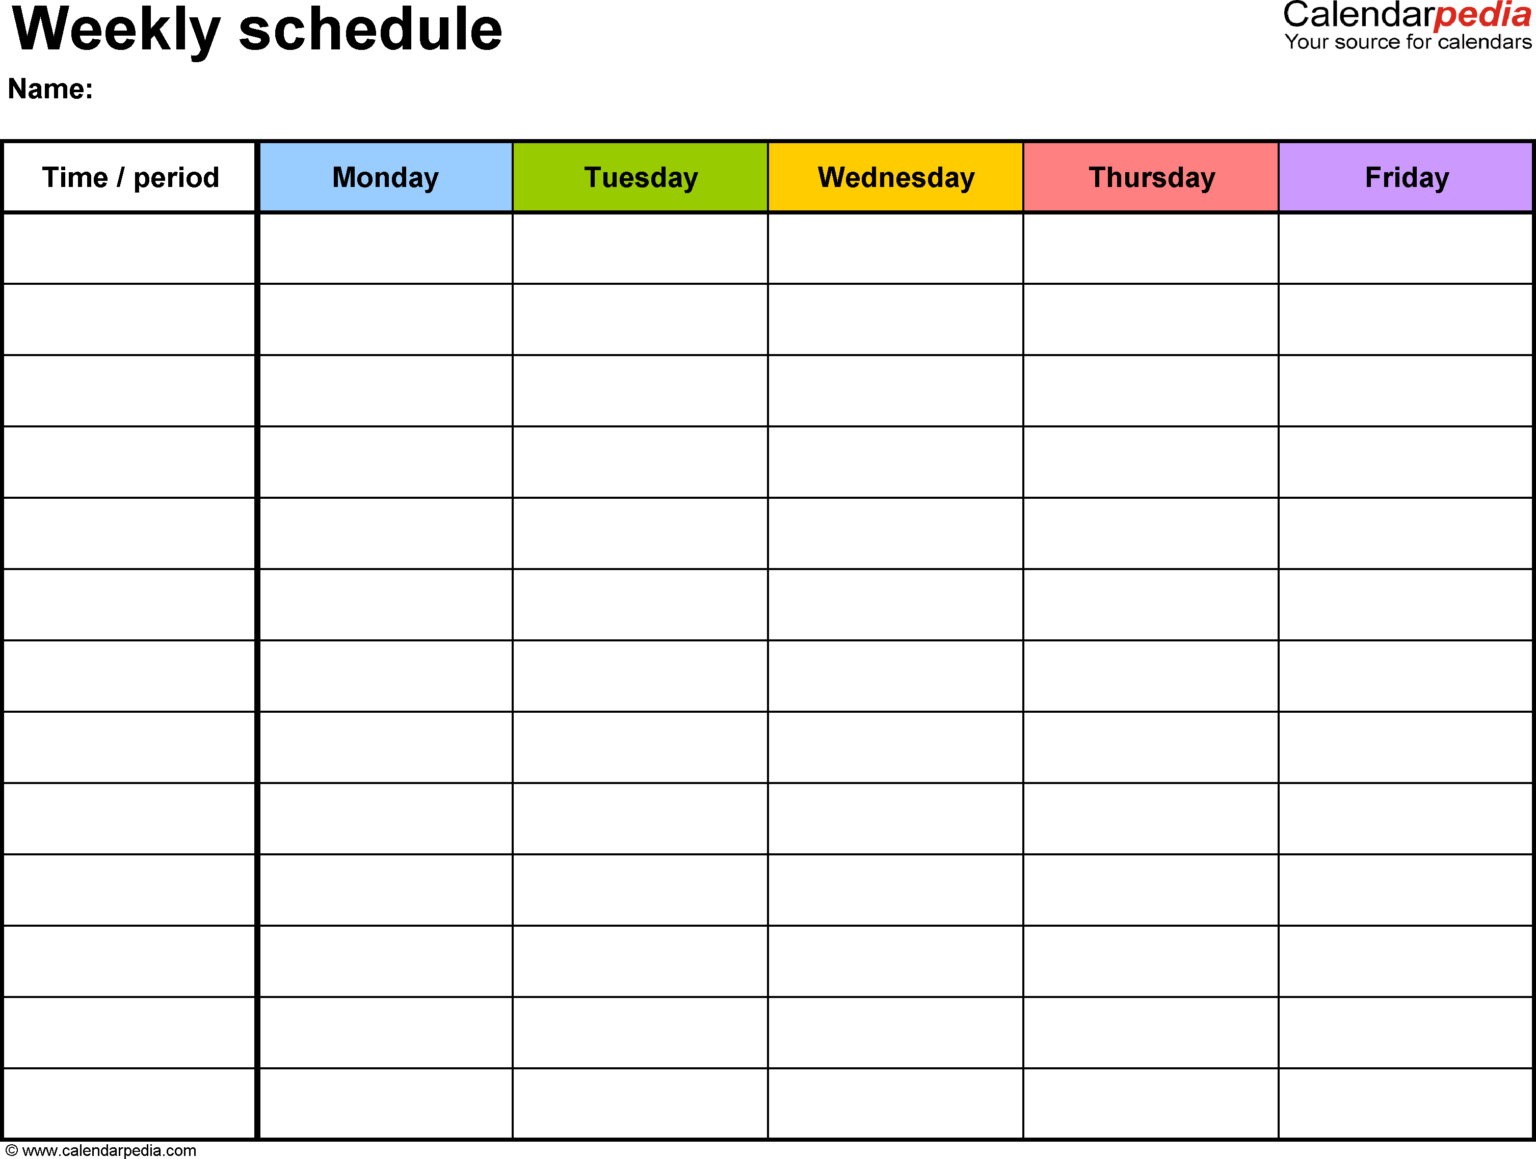 free-weekly-schedule-templates-for-excel-18-templates-throughout